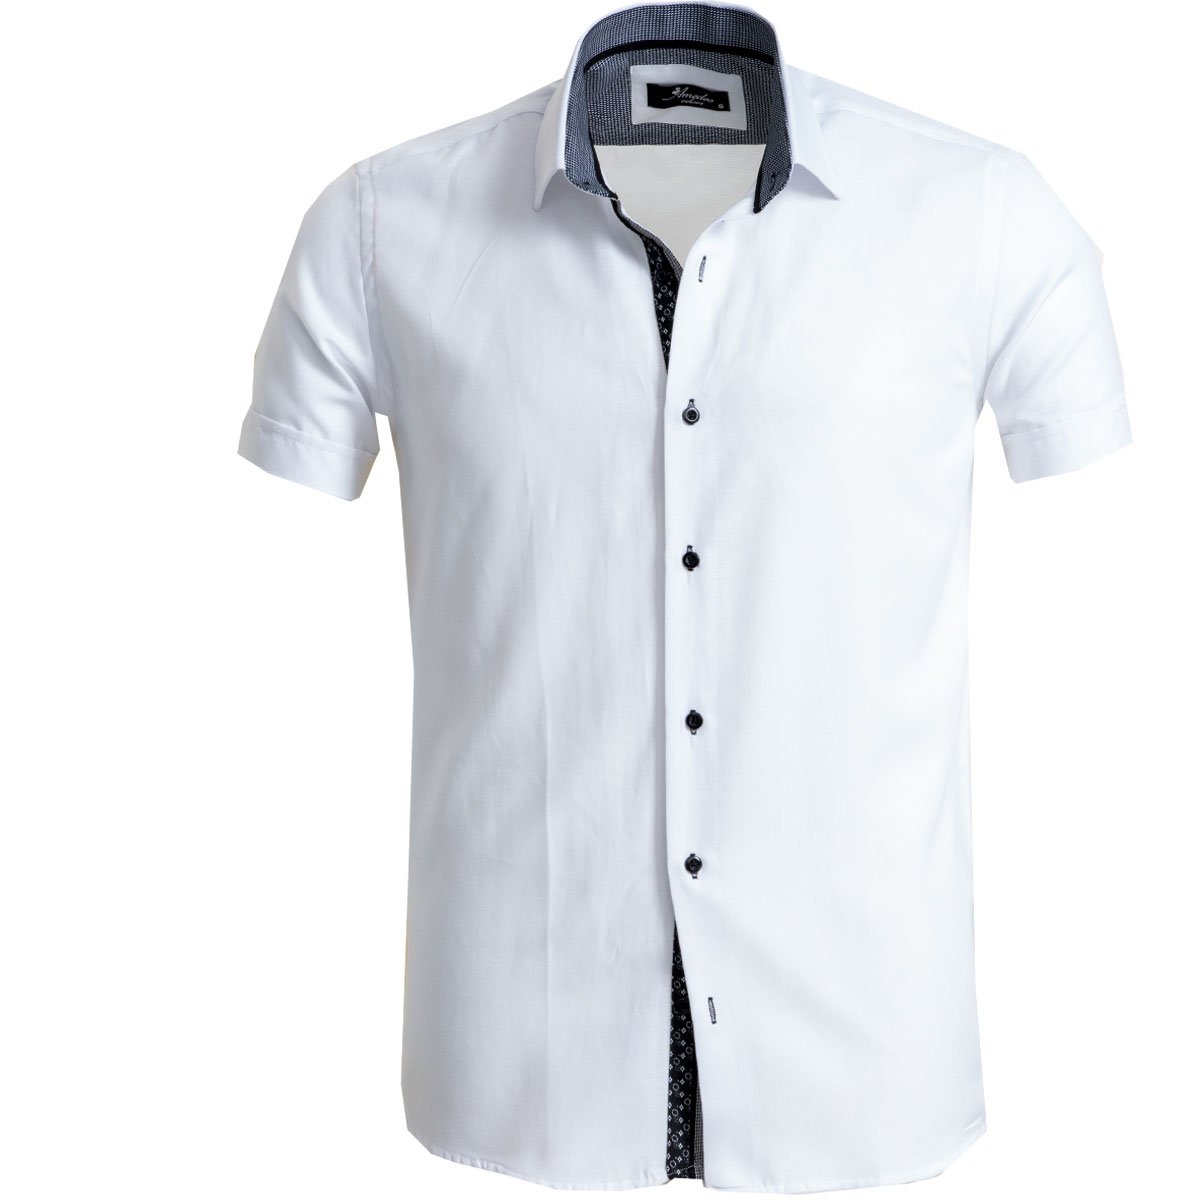 Solid White Mens Short Sleeve Button up Shirts - Tailored Slim Fit